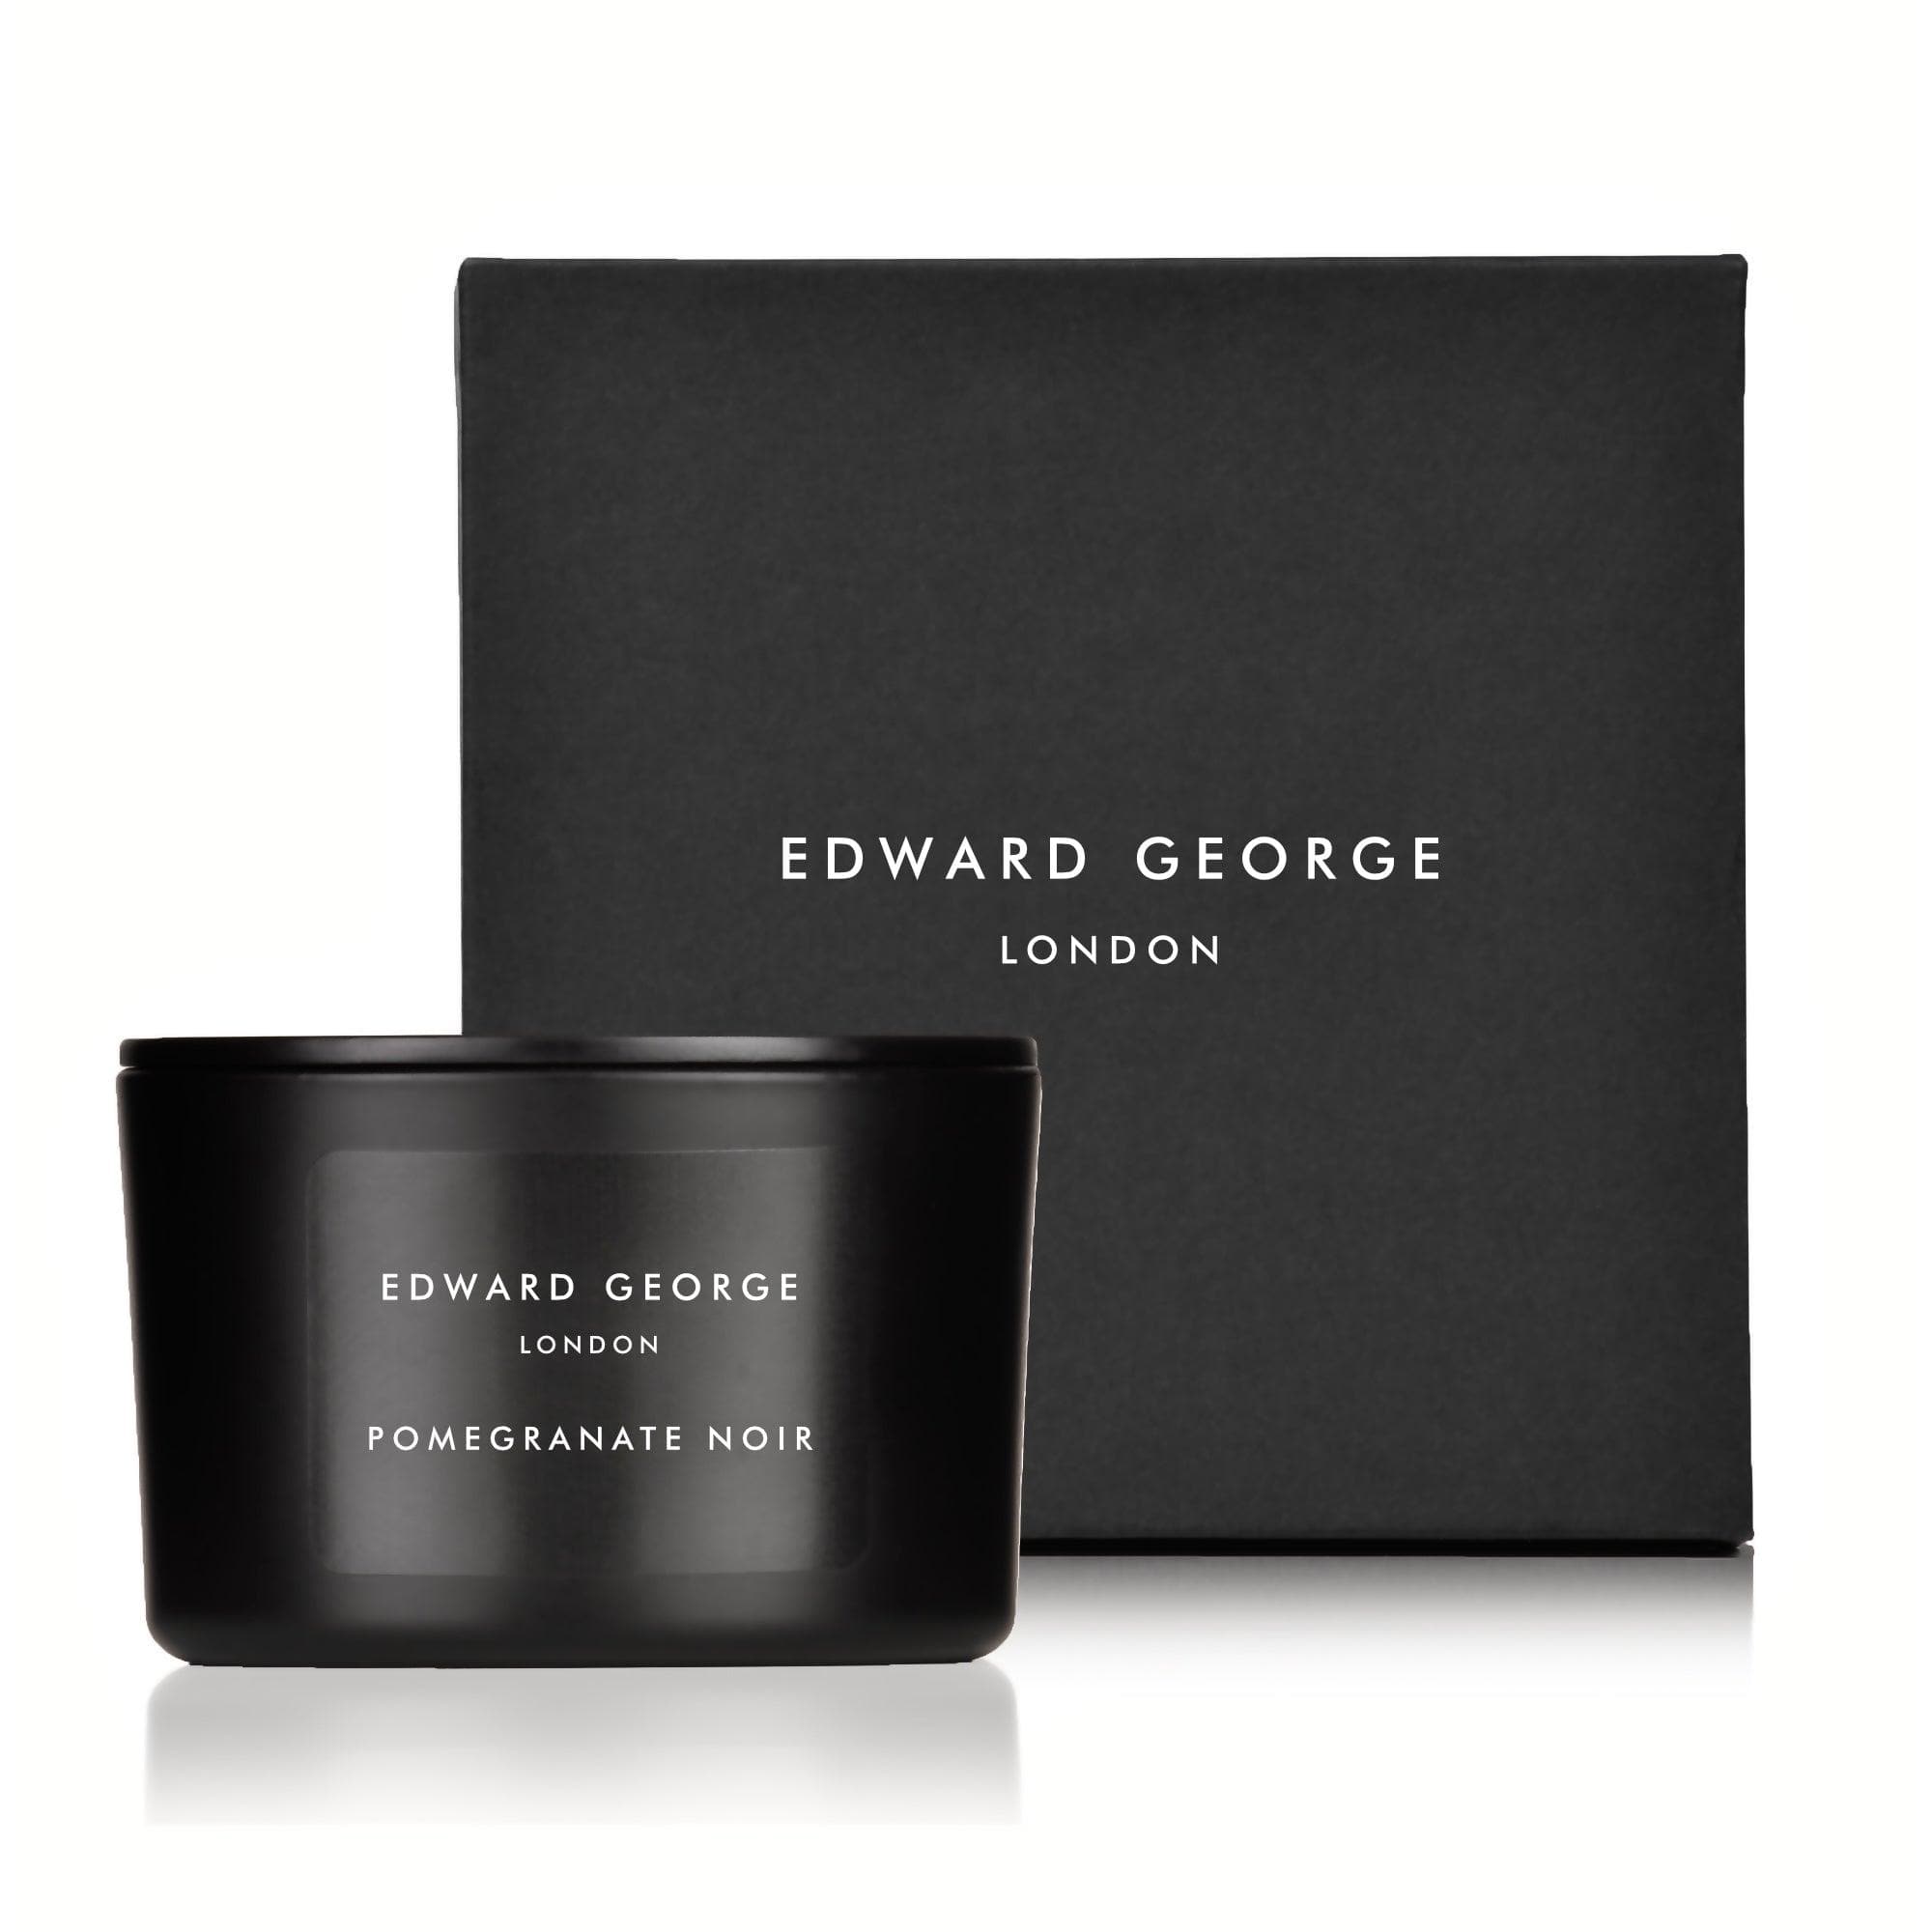 pomegrante noir candles home fragrance decor room living room edward george london luxury gift ritual scent set lid zinc alloy black wax best black scented candle women men small